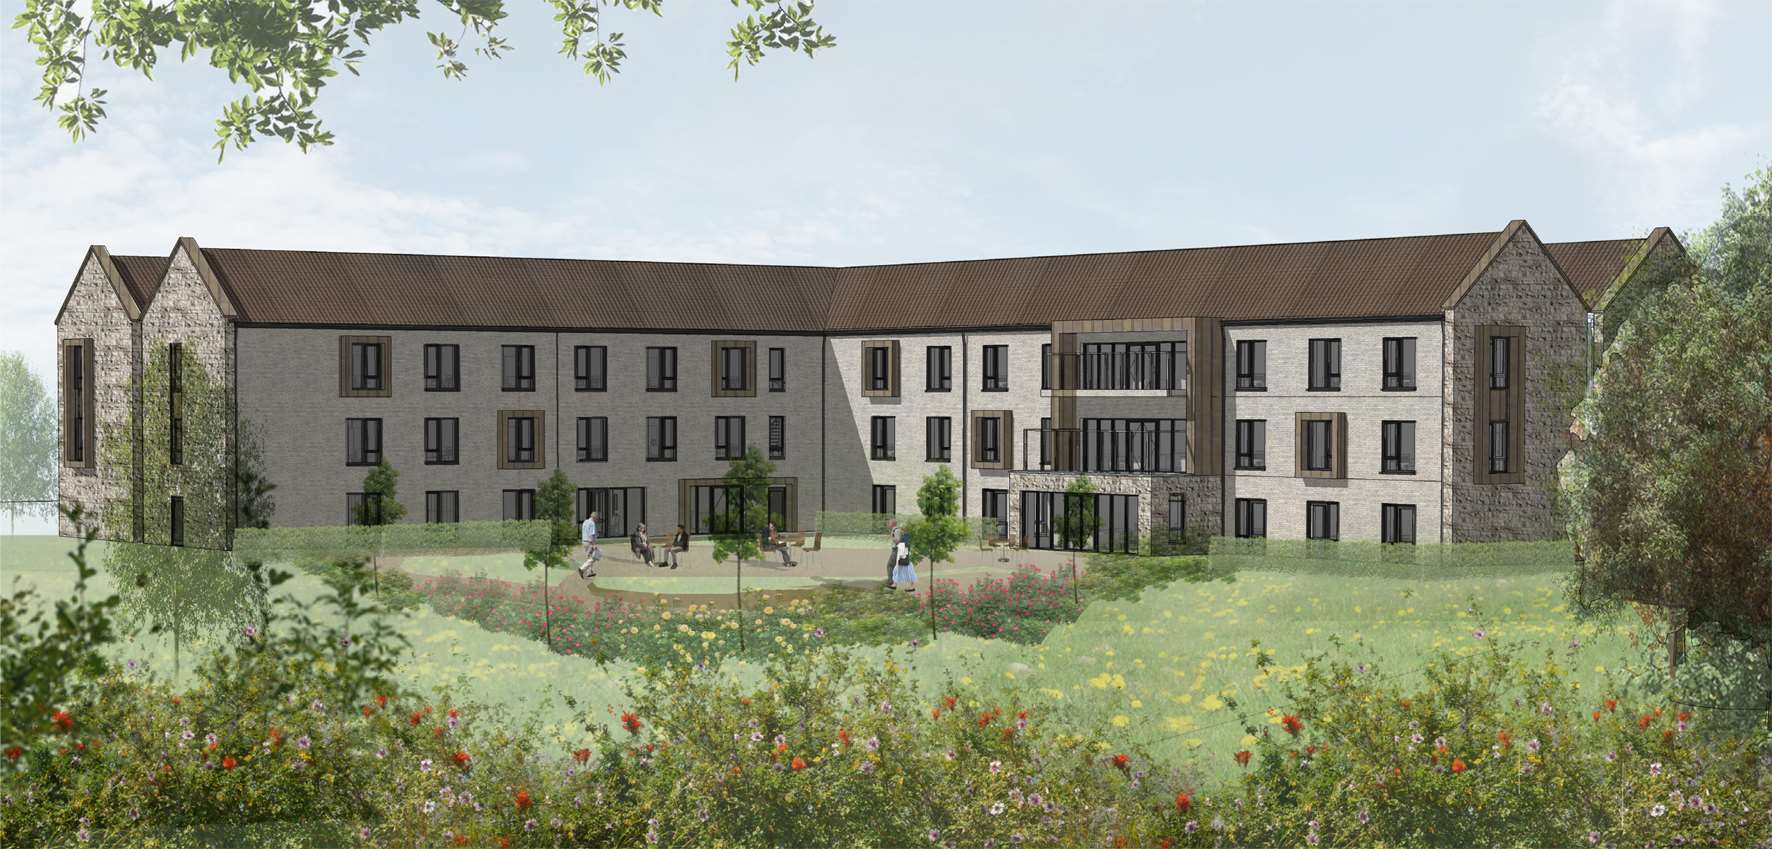 An artist's impression of the finished care home